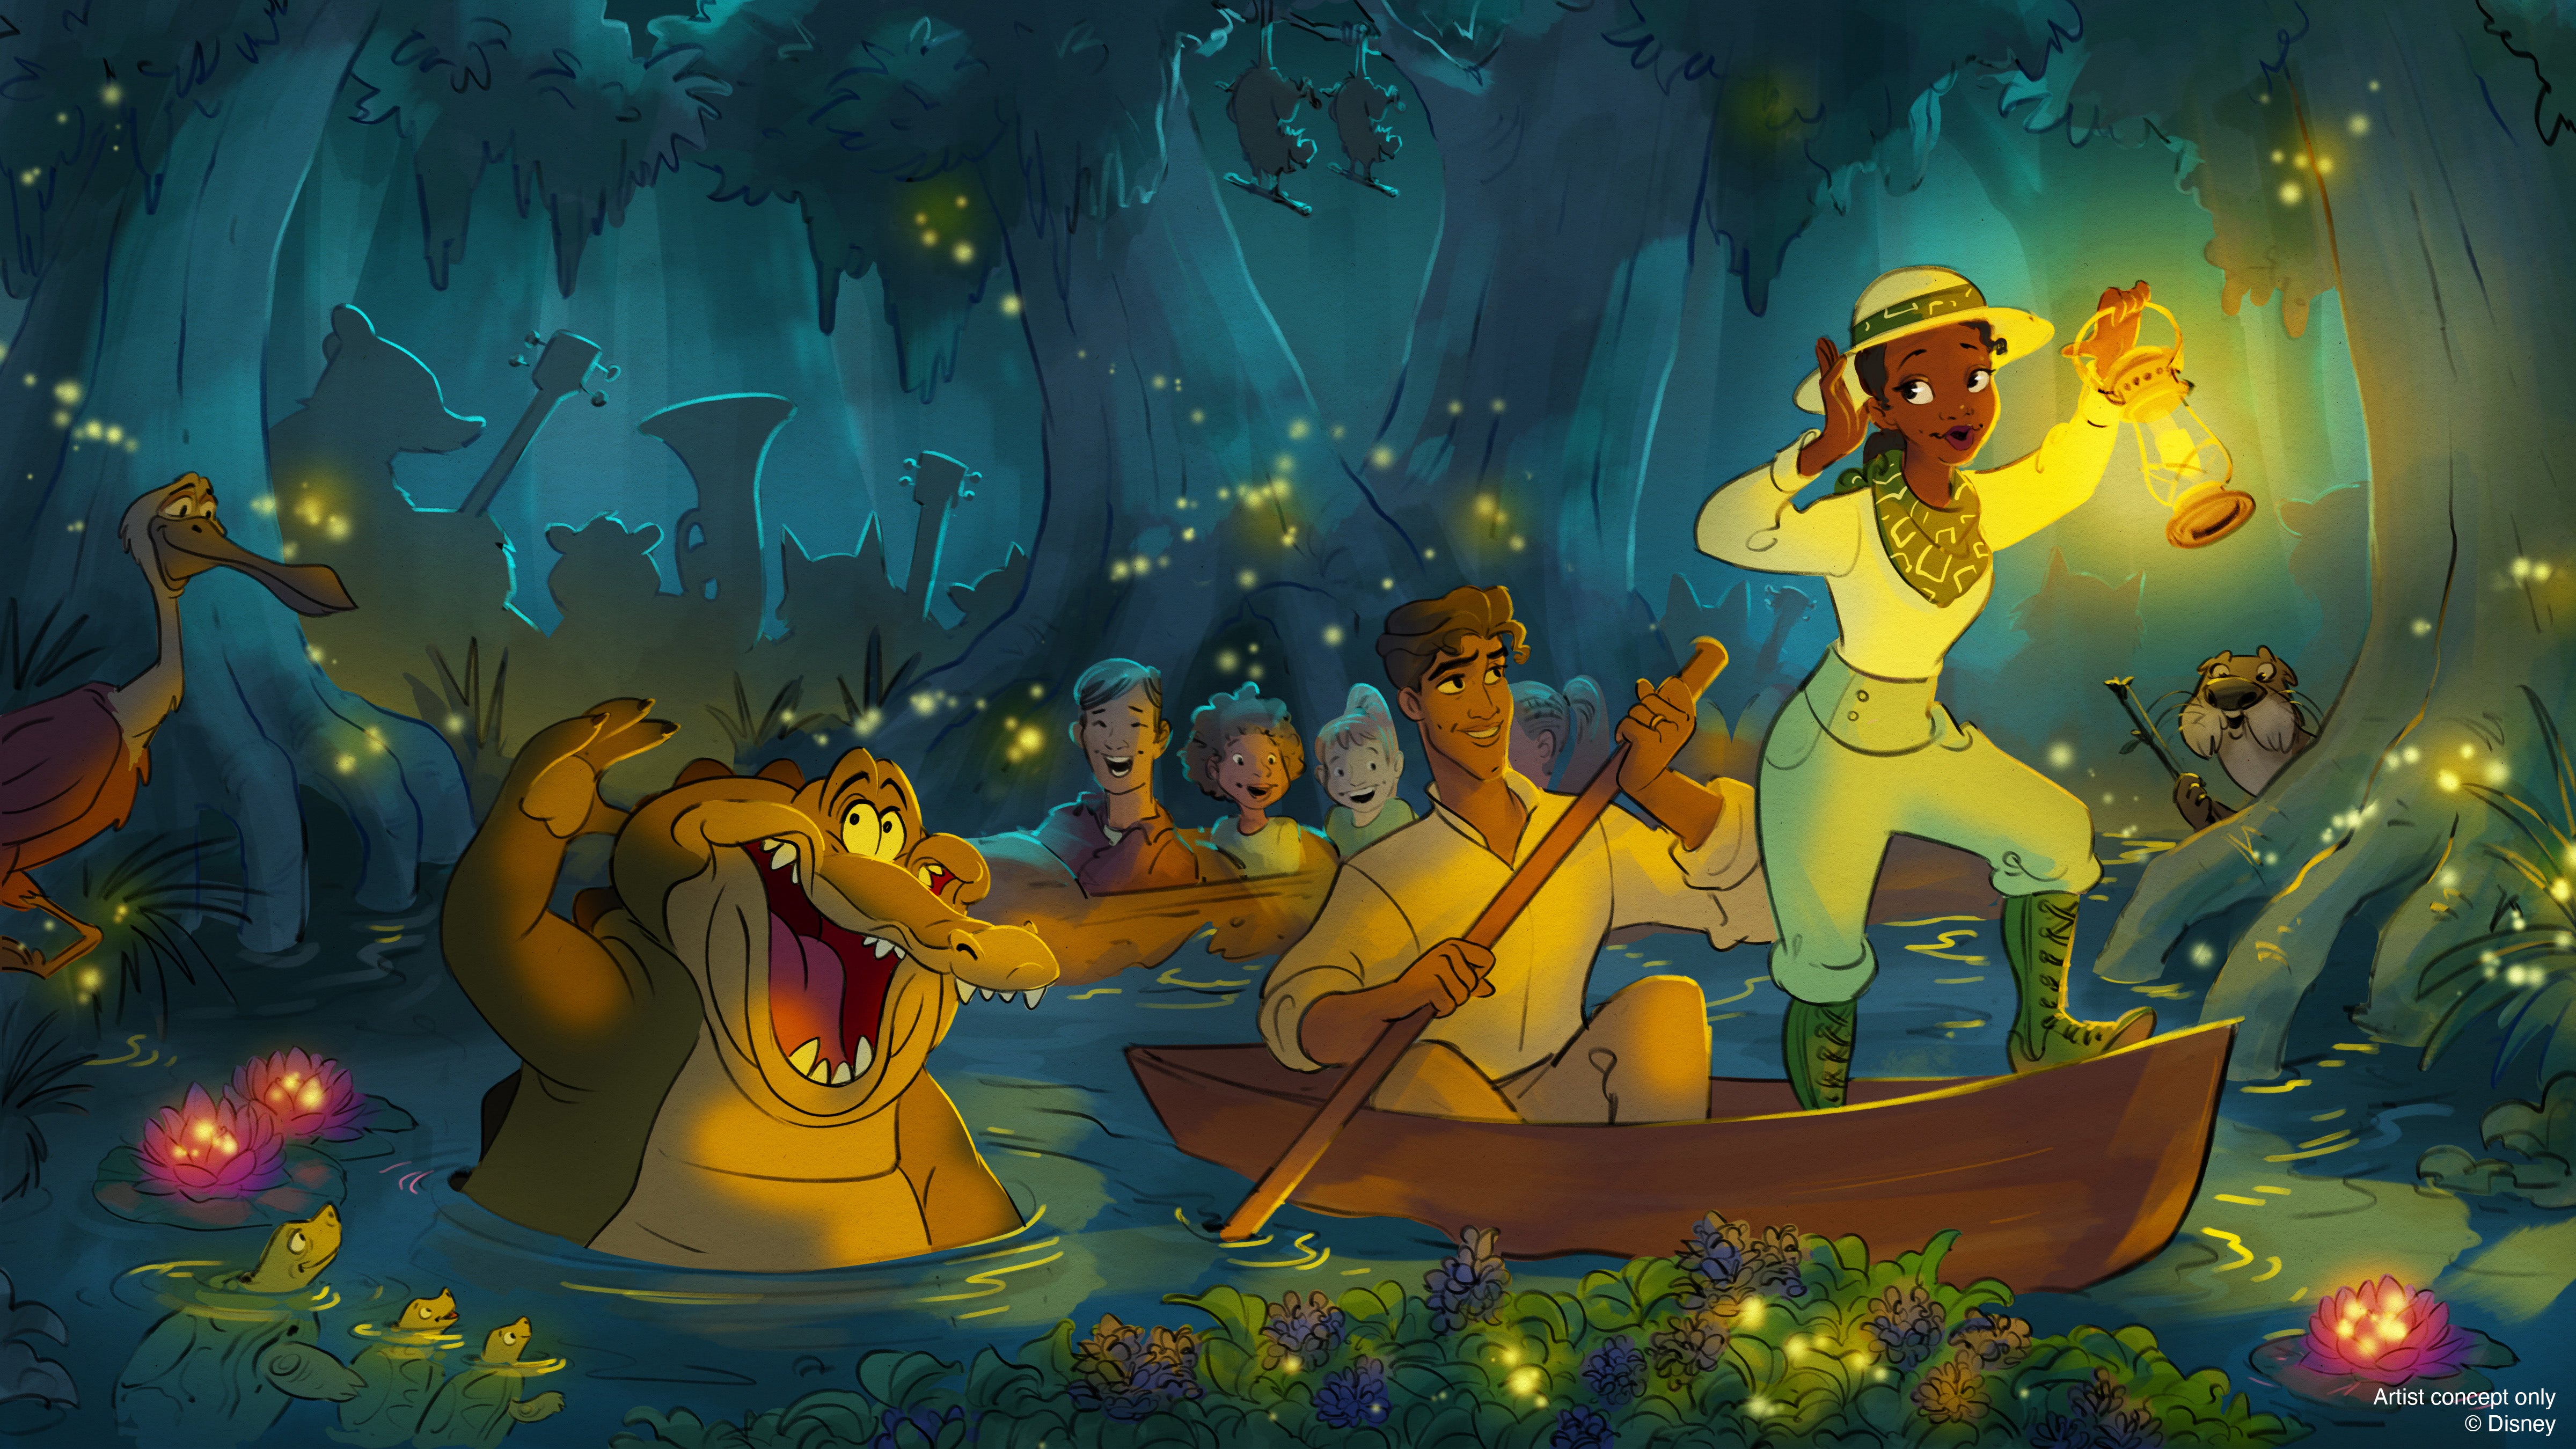 First look at new details of Disney's upcoming 'Princess and the Frog' attraction